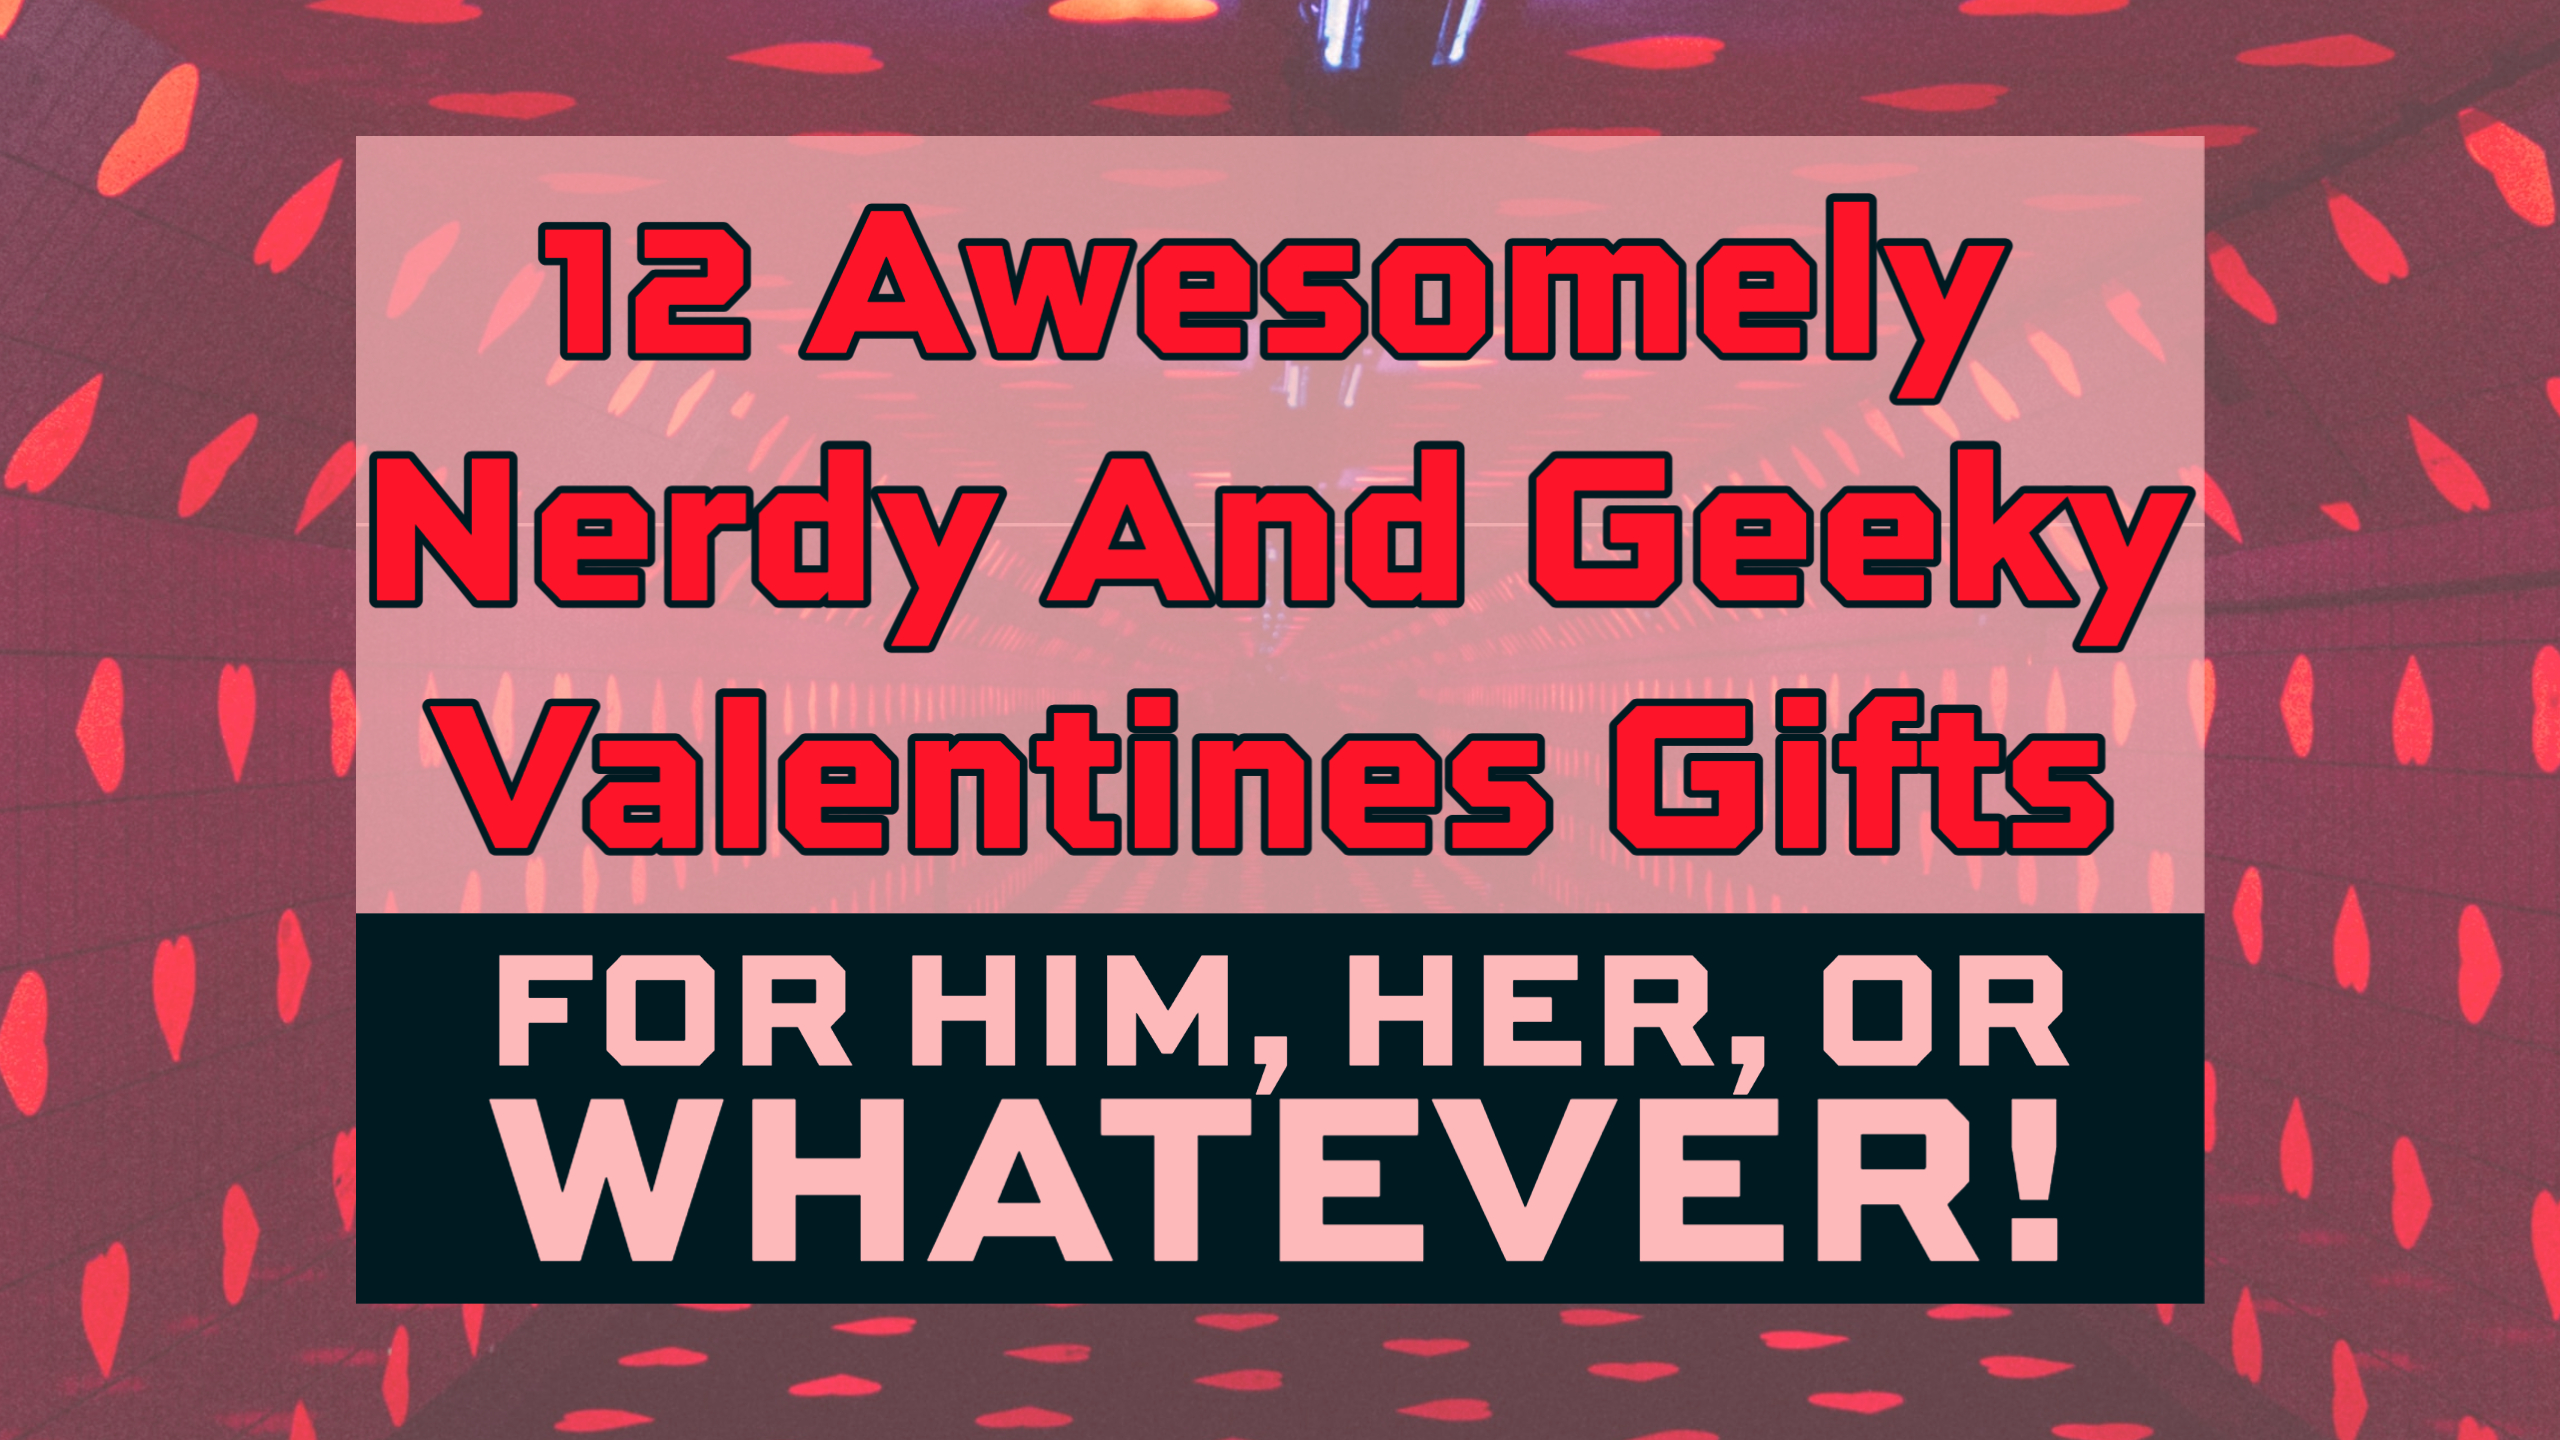 12 Awesomely Nerdy And Geeky Valentines Gifts For Him Or Her Header